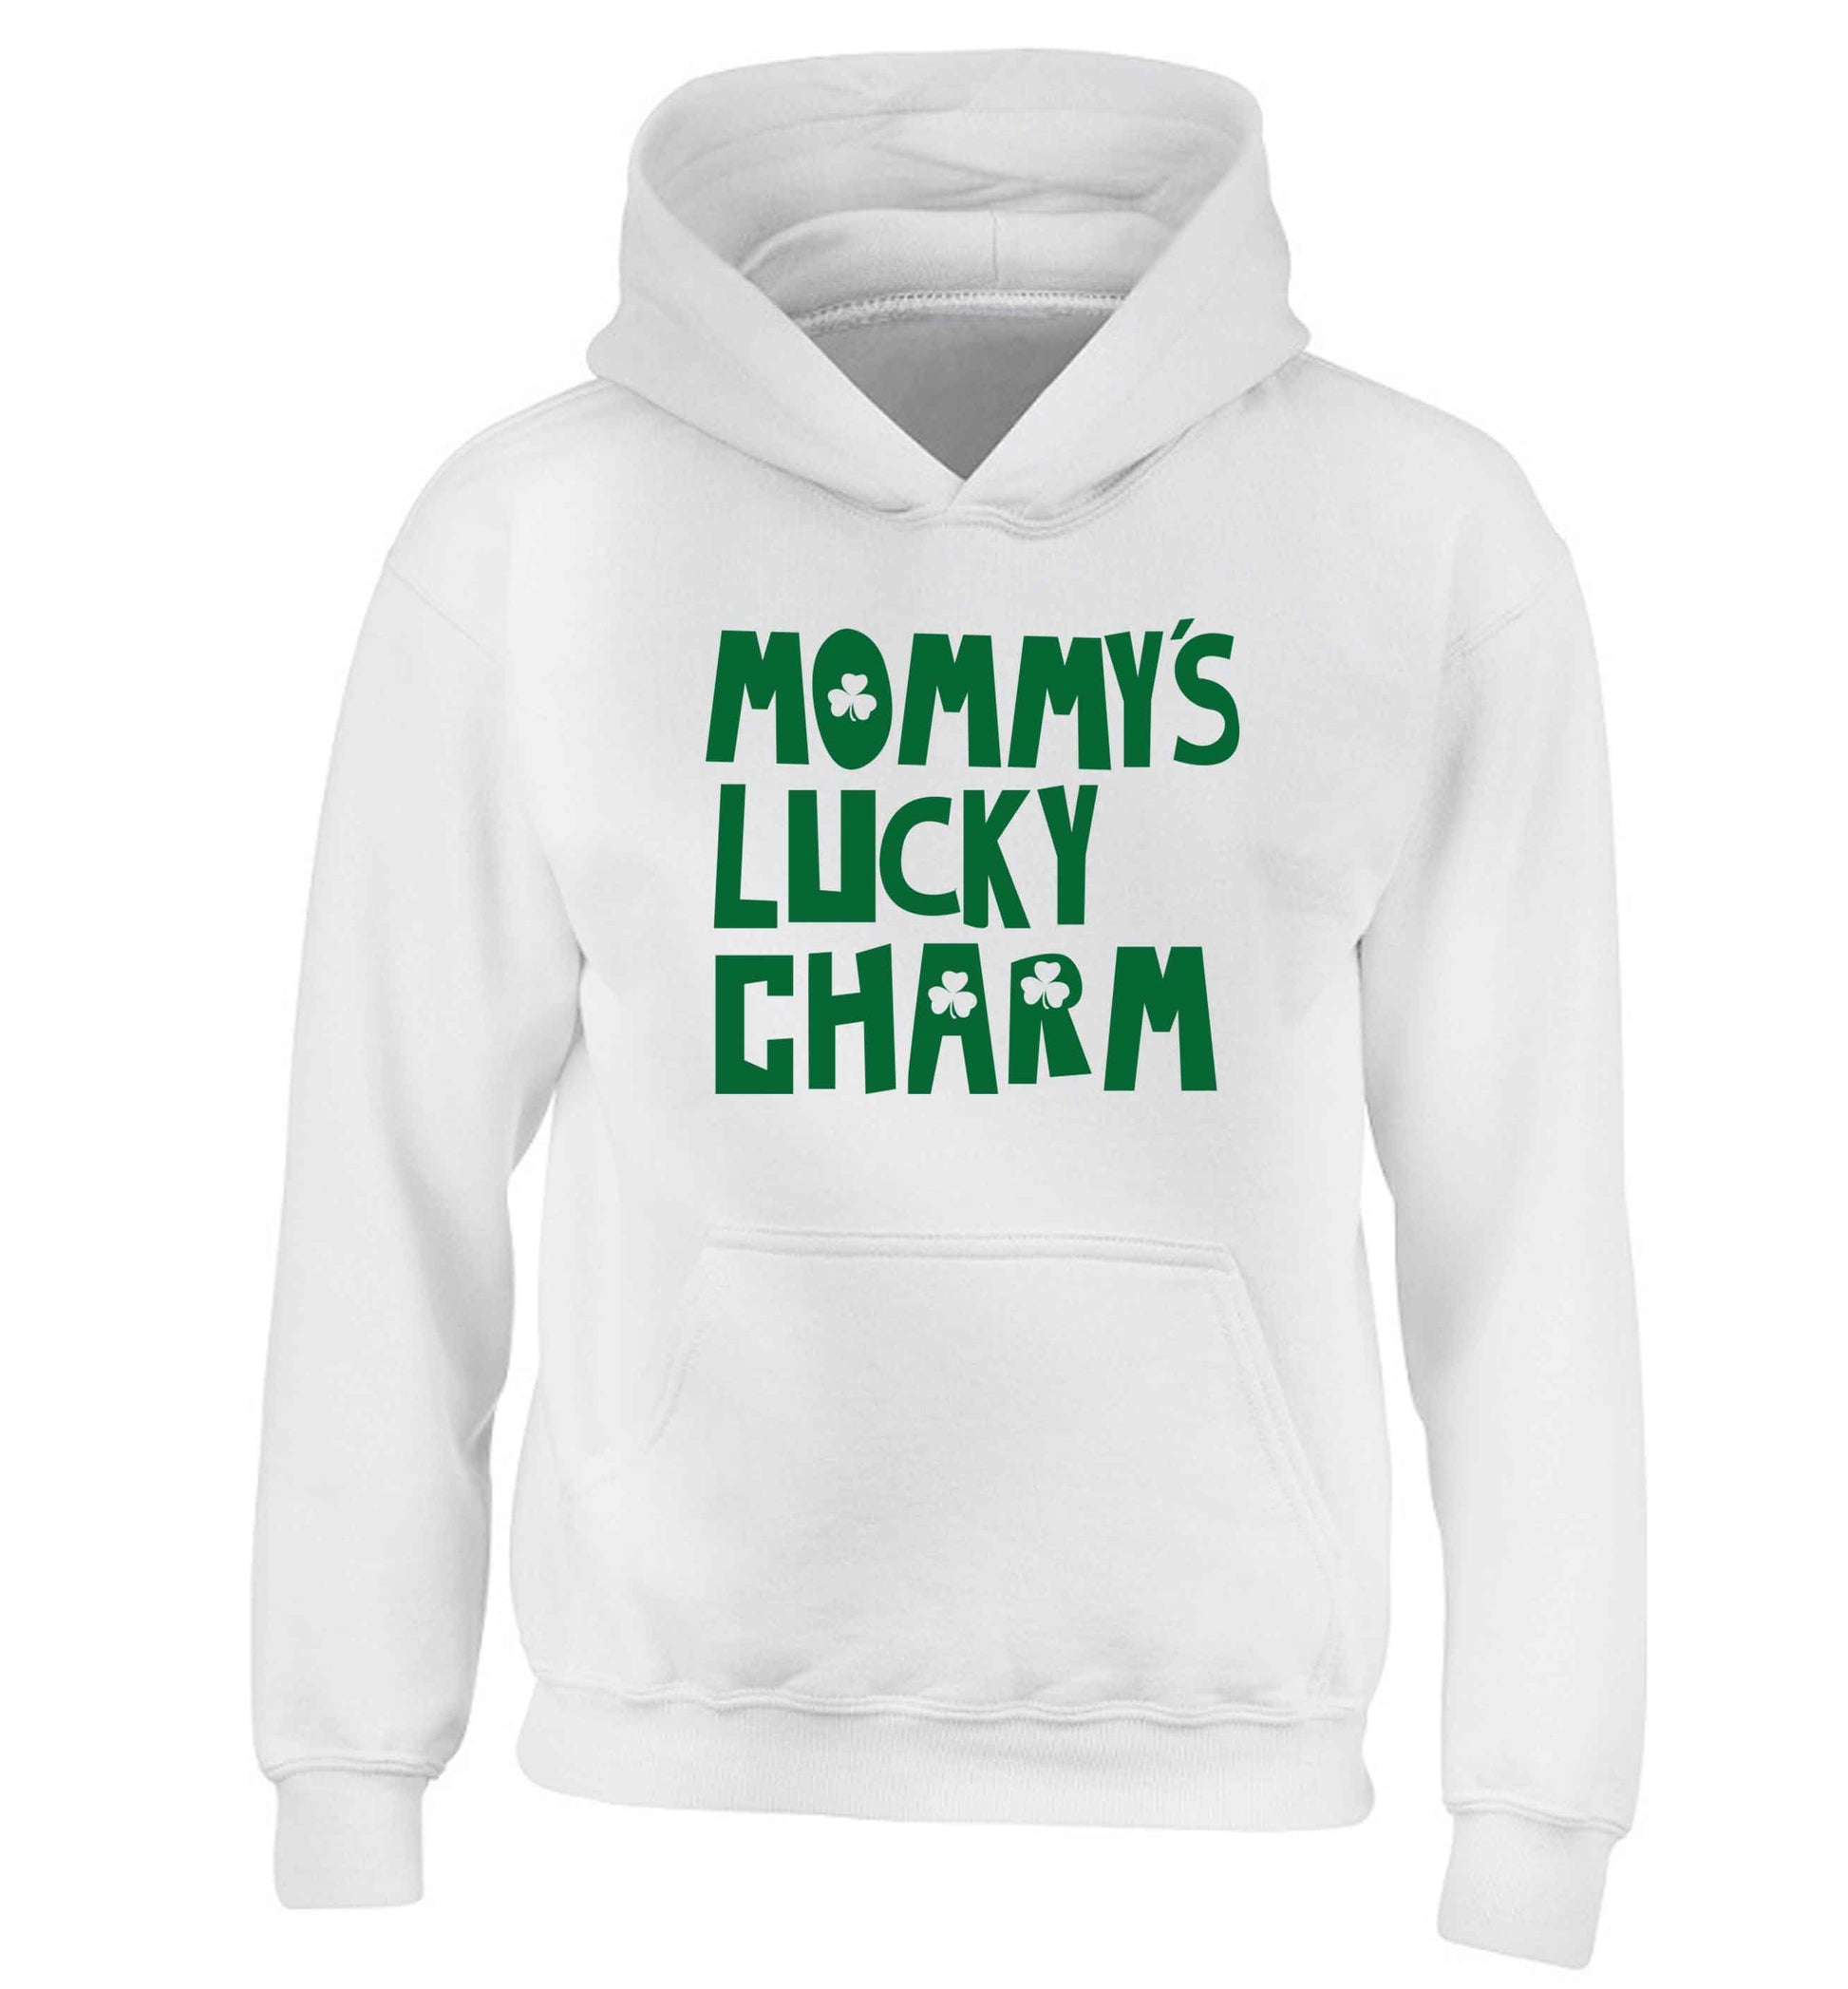 Mommy's lucky charm children's white hoodie 12-13 Years